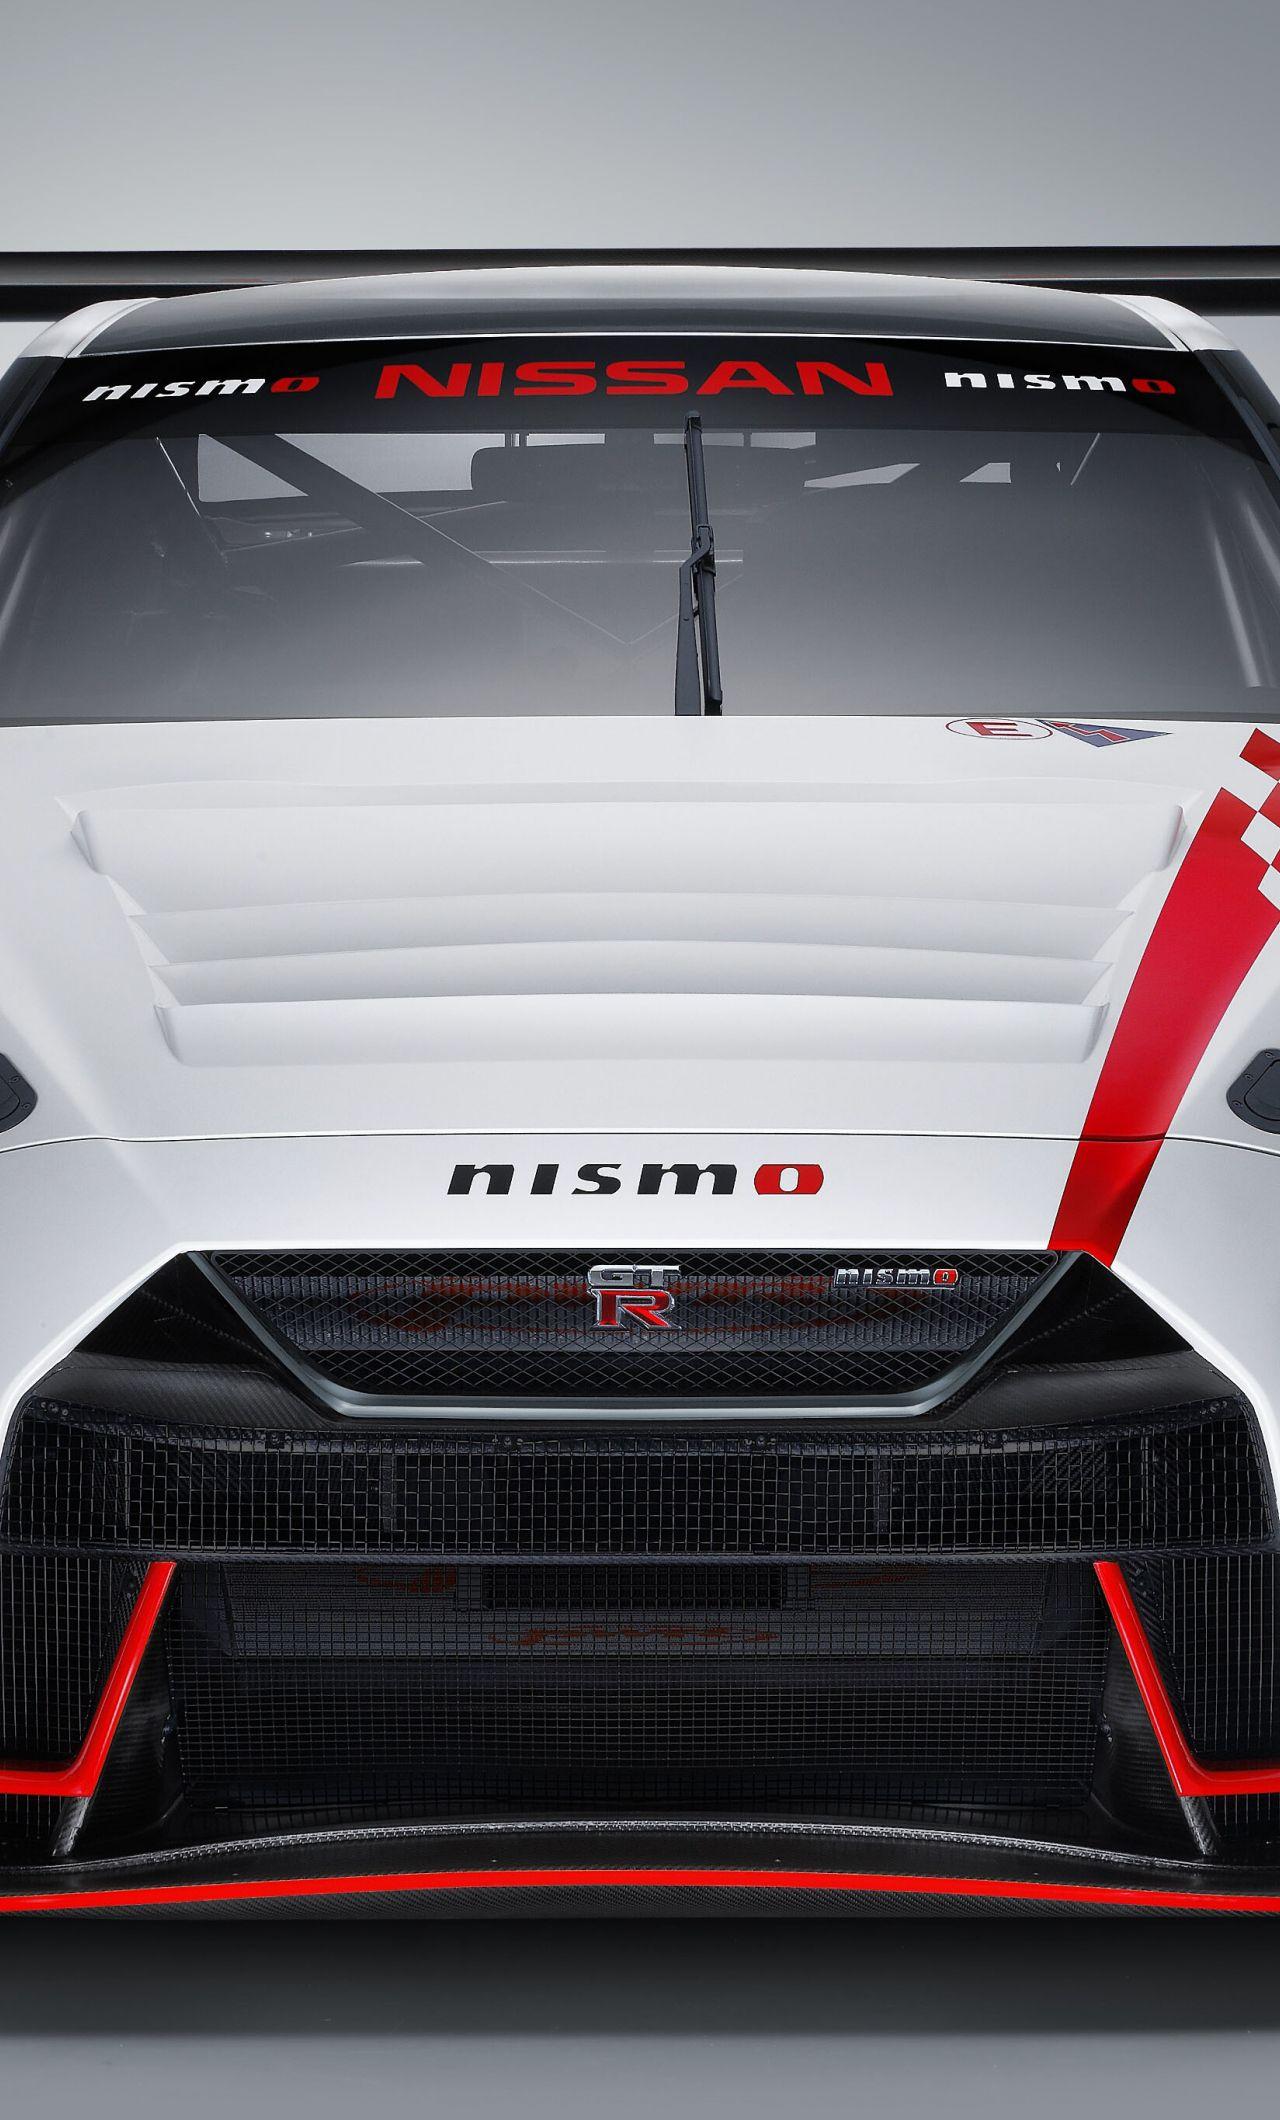 Nismo Iphone Wallpapers Top Free Nismo Iphone Backgrounds Wallpaperaccess